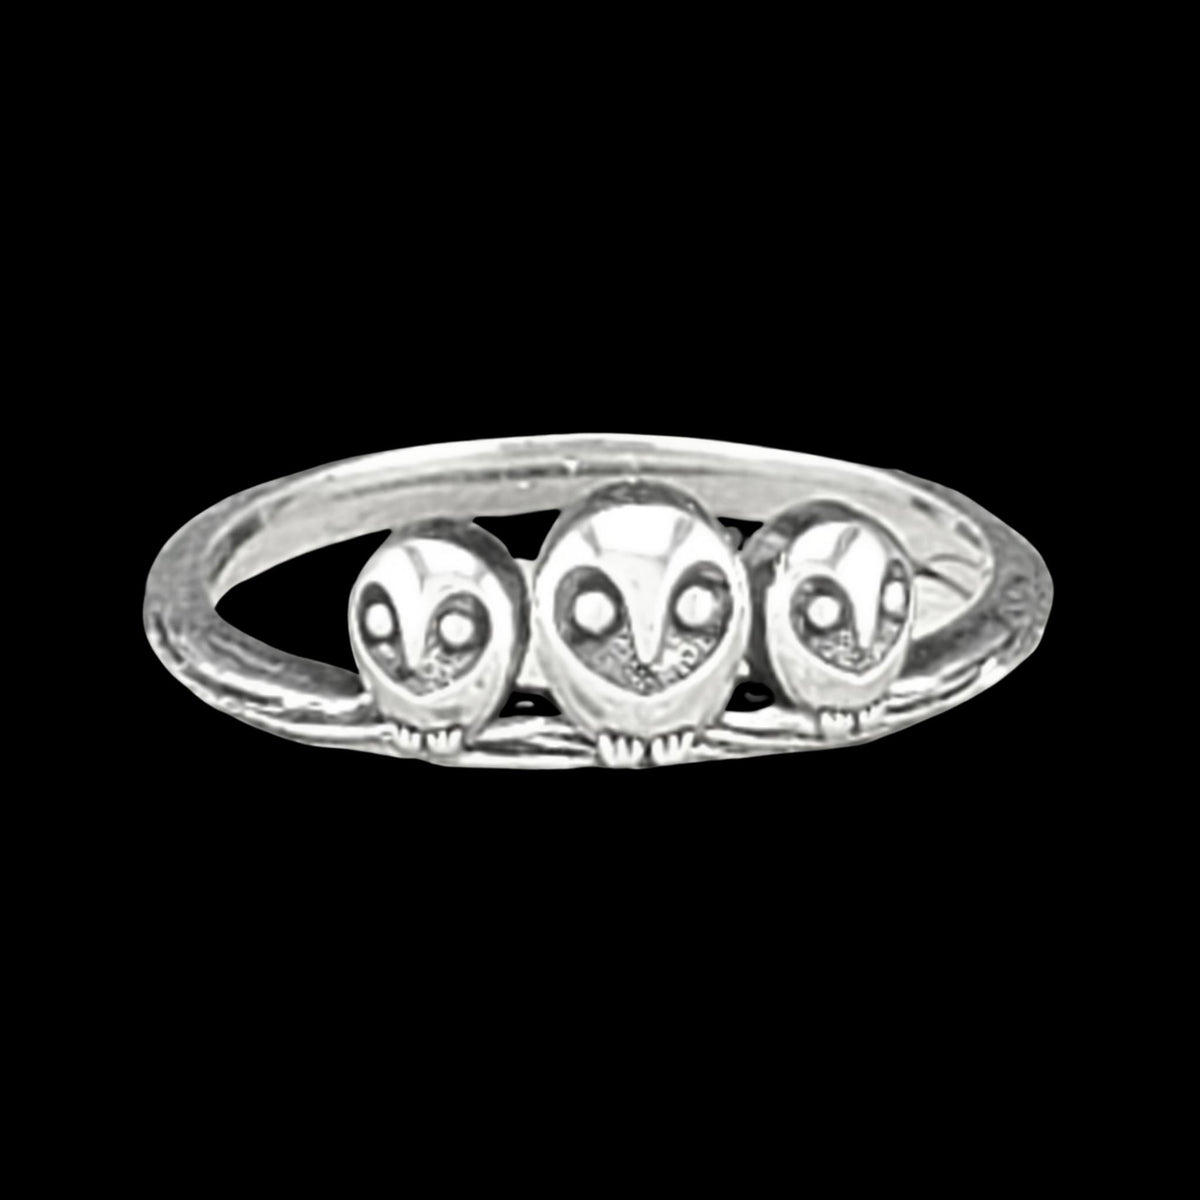 Family of Owls Dainty Stacker Ring for BUNDLES ONLY - See Separate Listing to Purchase Single Ring